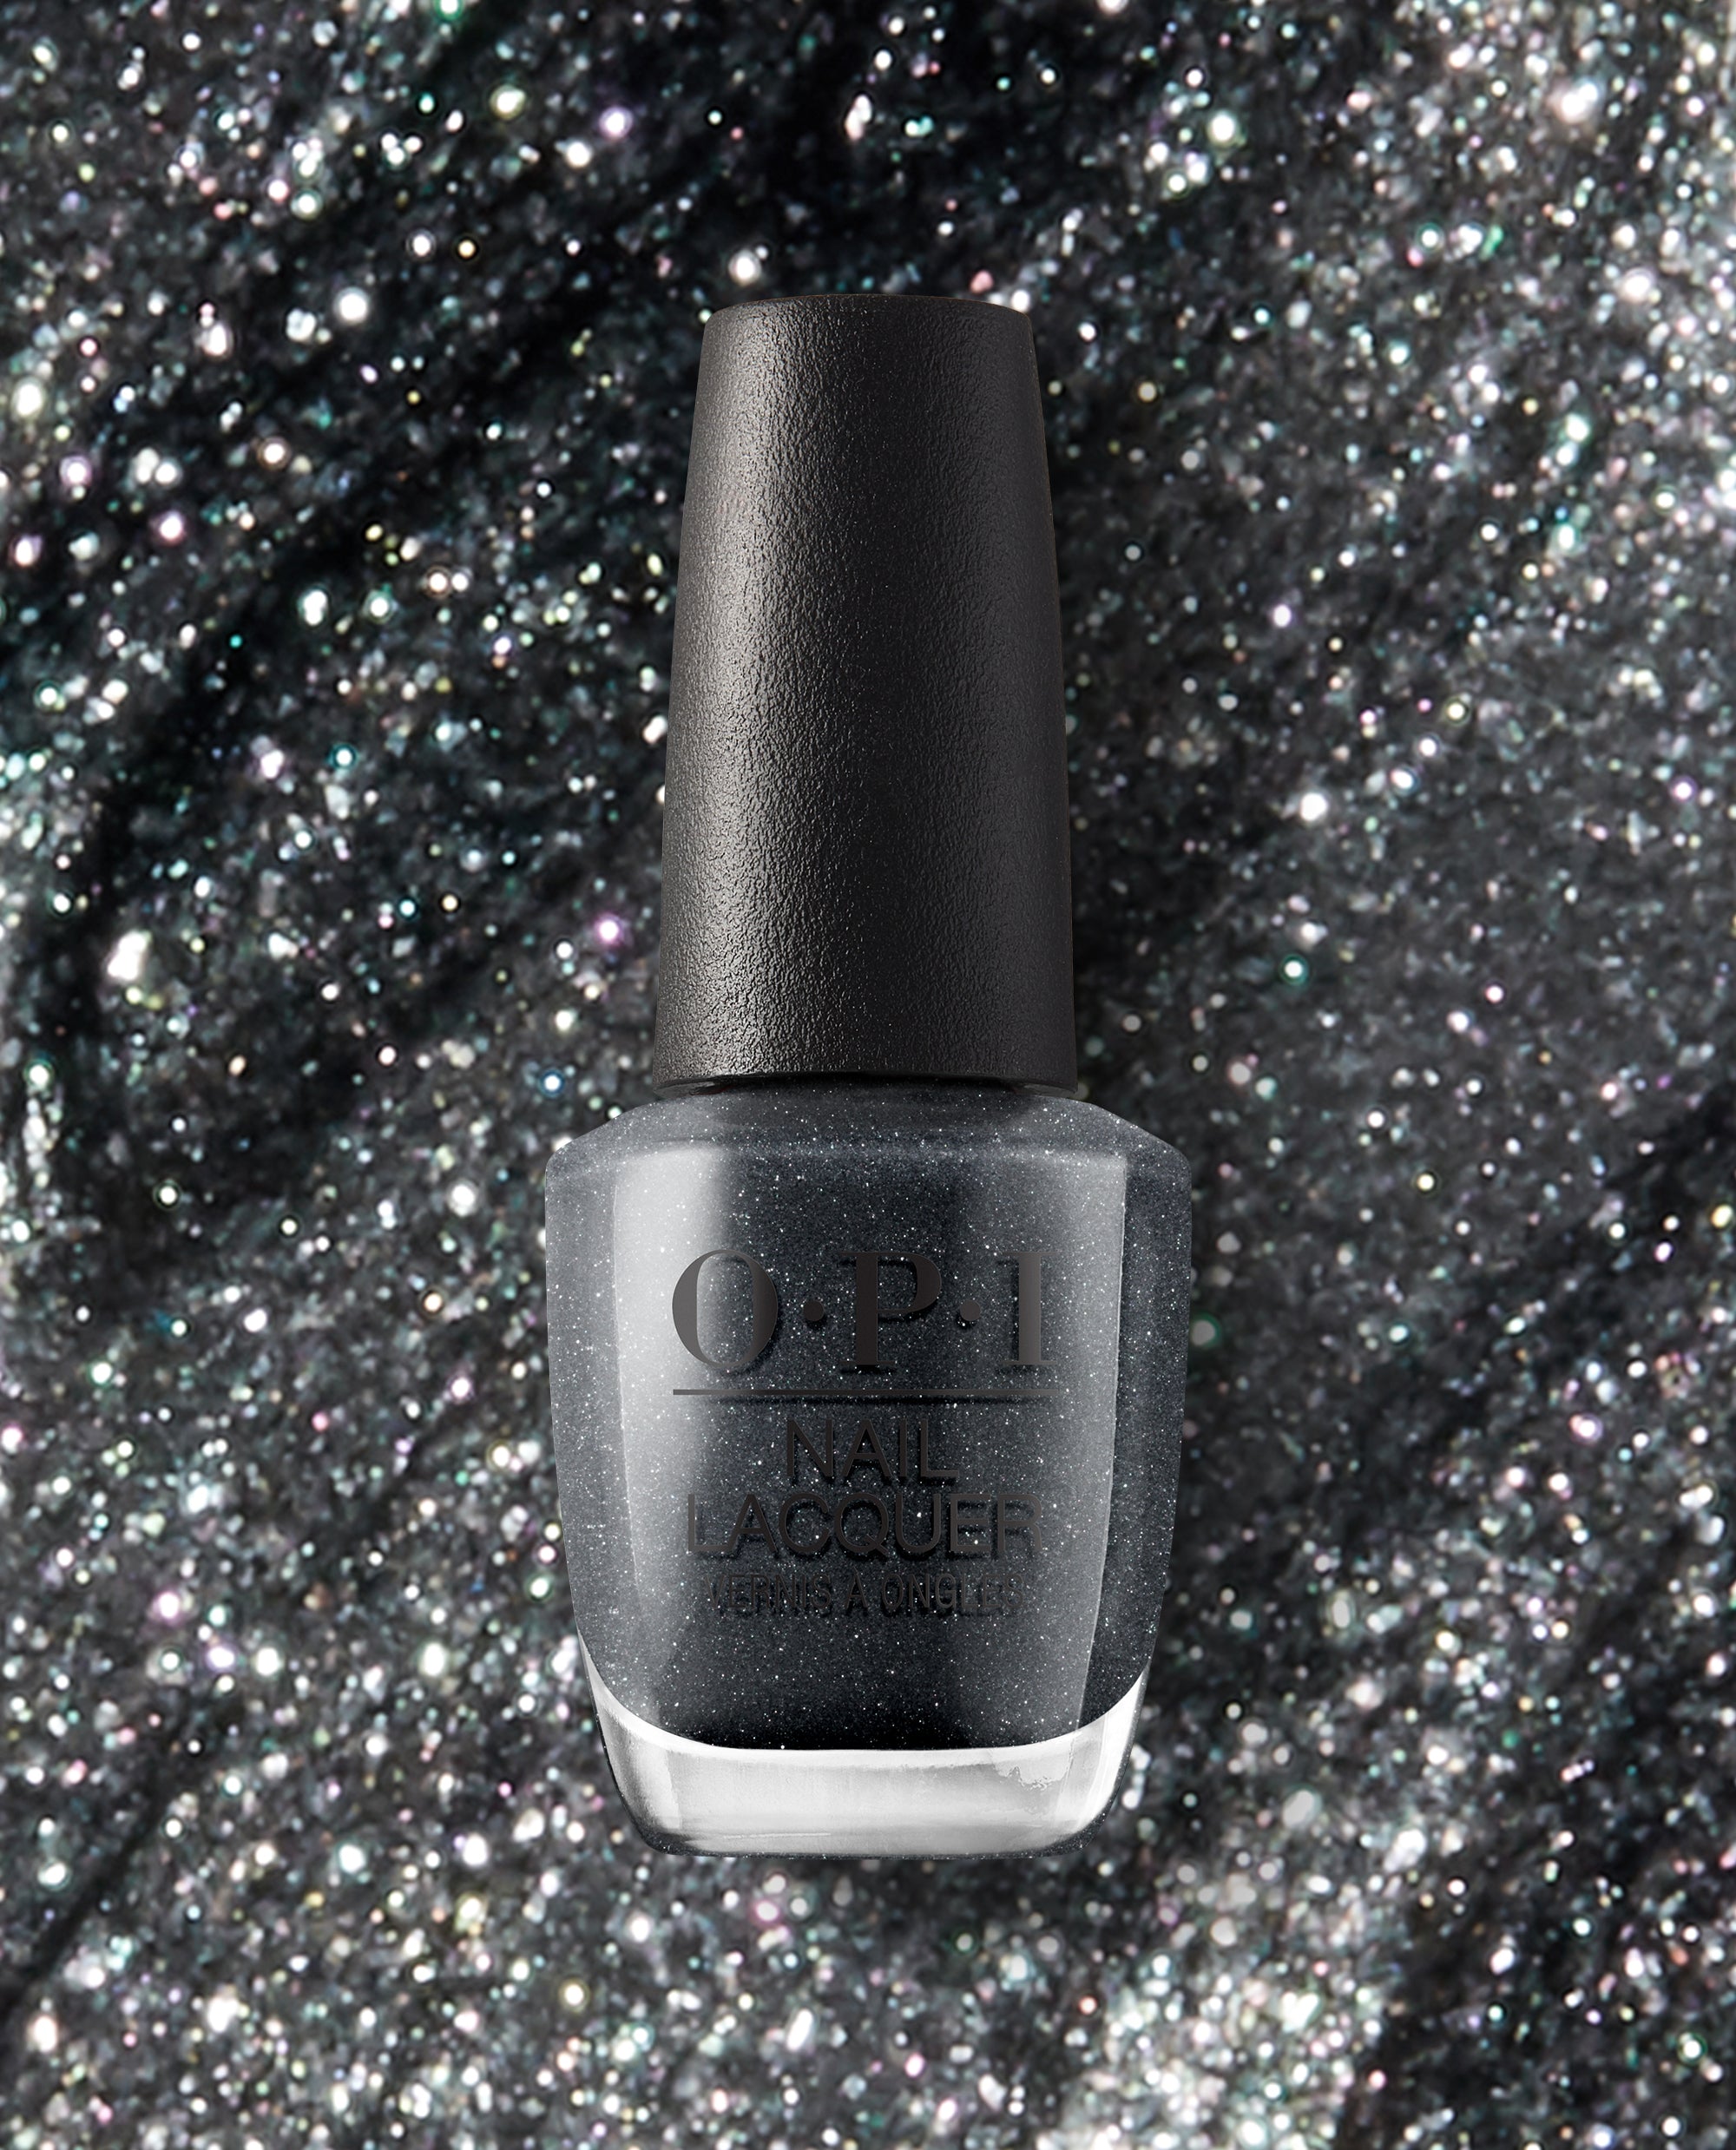 OPI Lucerne-tainly Look Marvelous Gray Nail Polish